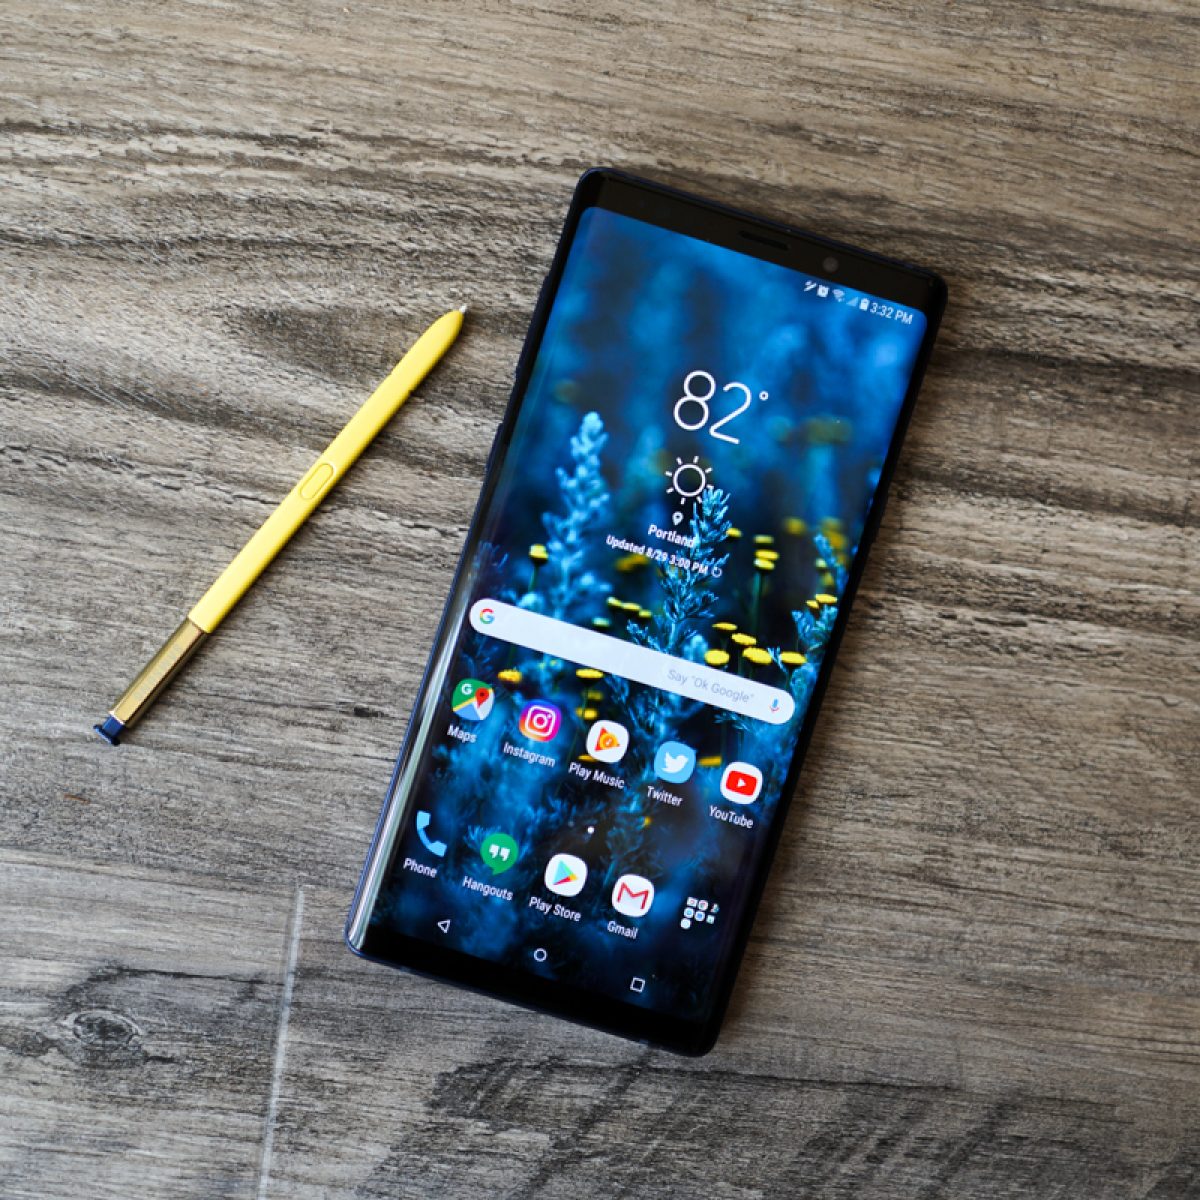 Samsung note 24. Галакси ноут 9. Samsung s9 Note. Самсунг нот 23. Samsung Note 9 Pro.